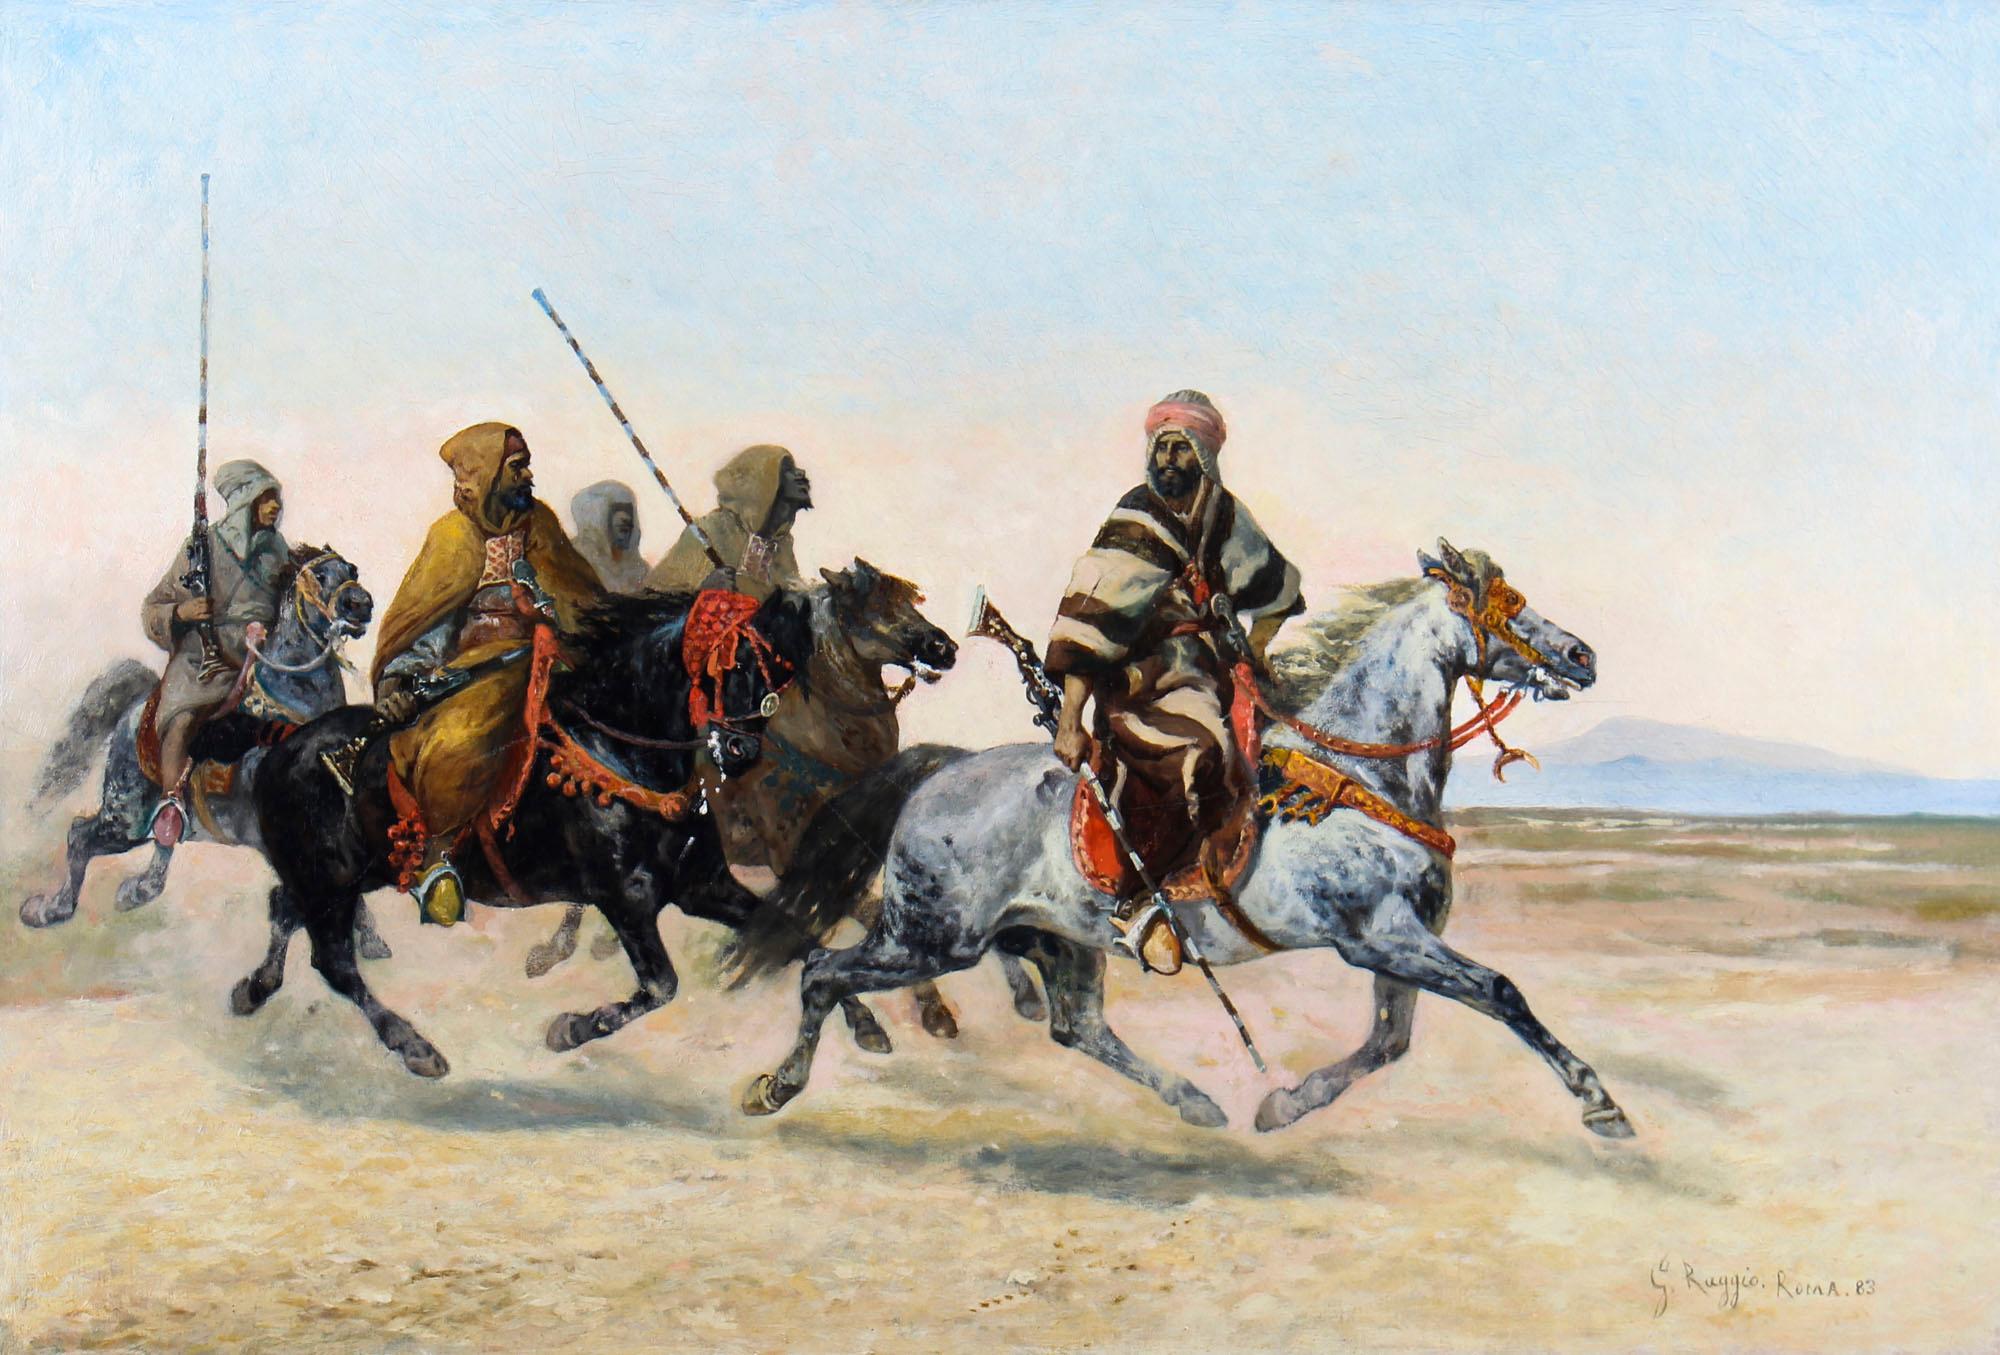 This is a dramatic antique oil on canvas painting of a Bedouin war party by the renowned Italian artist Giuseppe Raggio, signed and dated , Roma 83, for 1883.

The painting features five tradionally dressed Bedouin fighters racing their horses